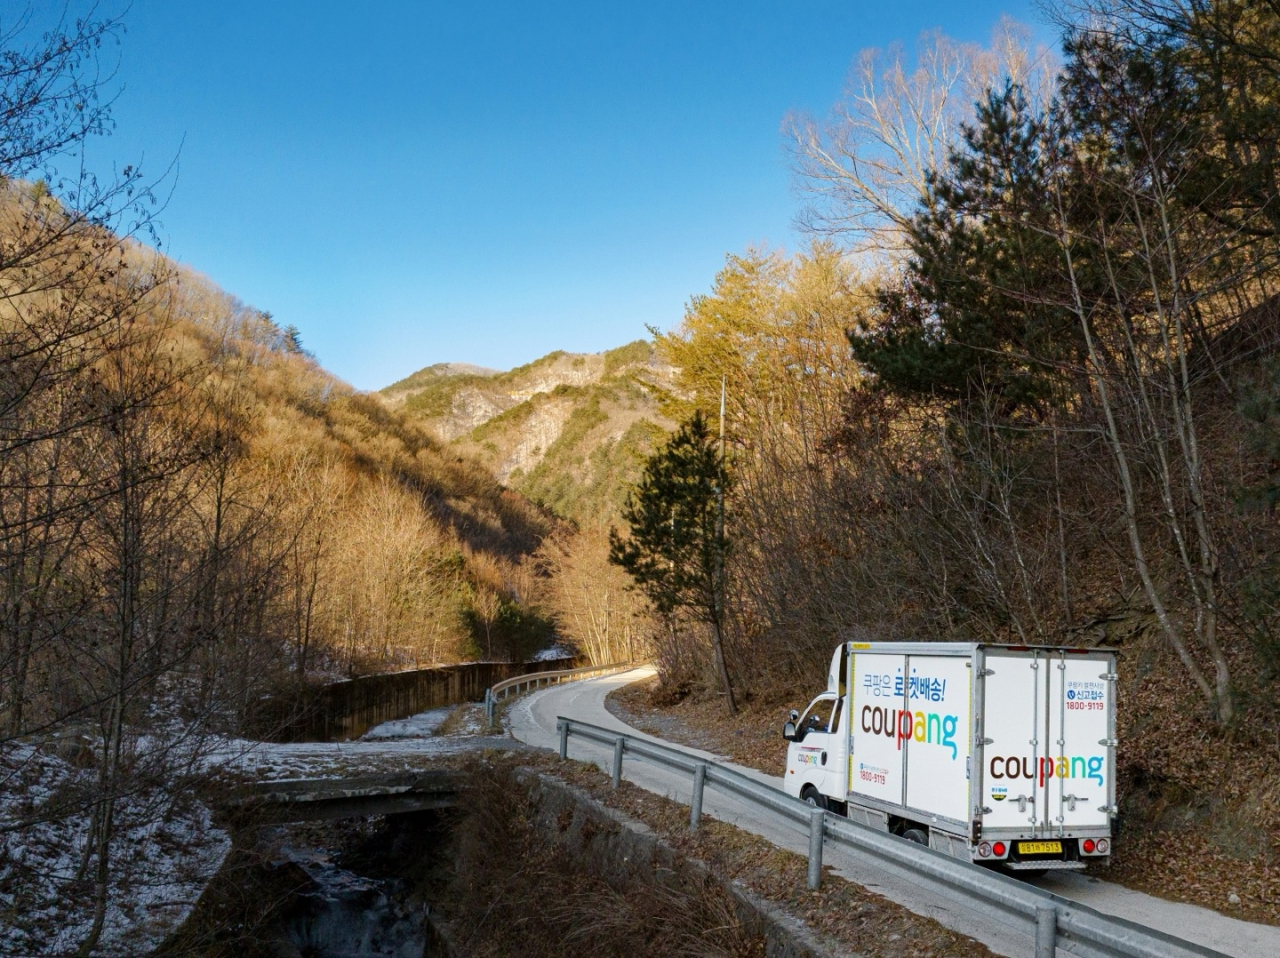 A Coupang delivery truck drives through a mountainous area. (Coupang)